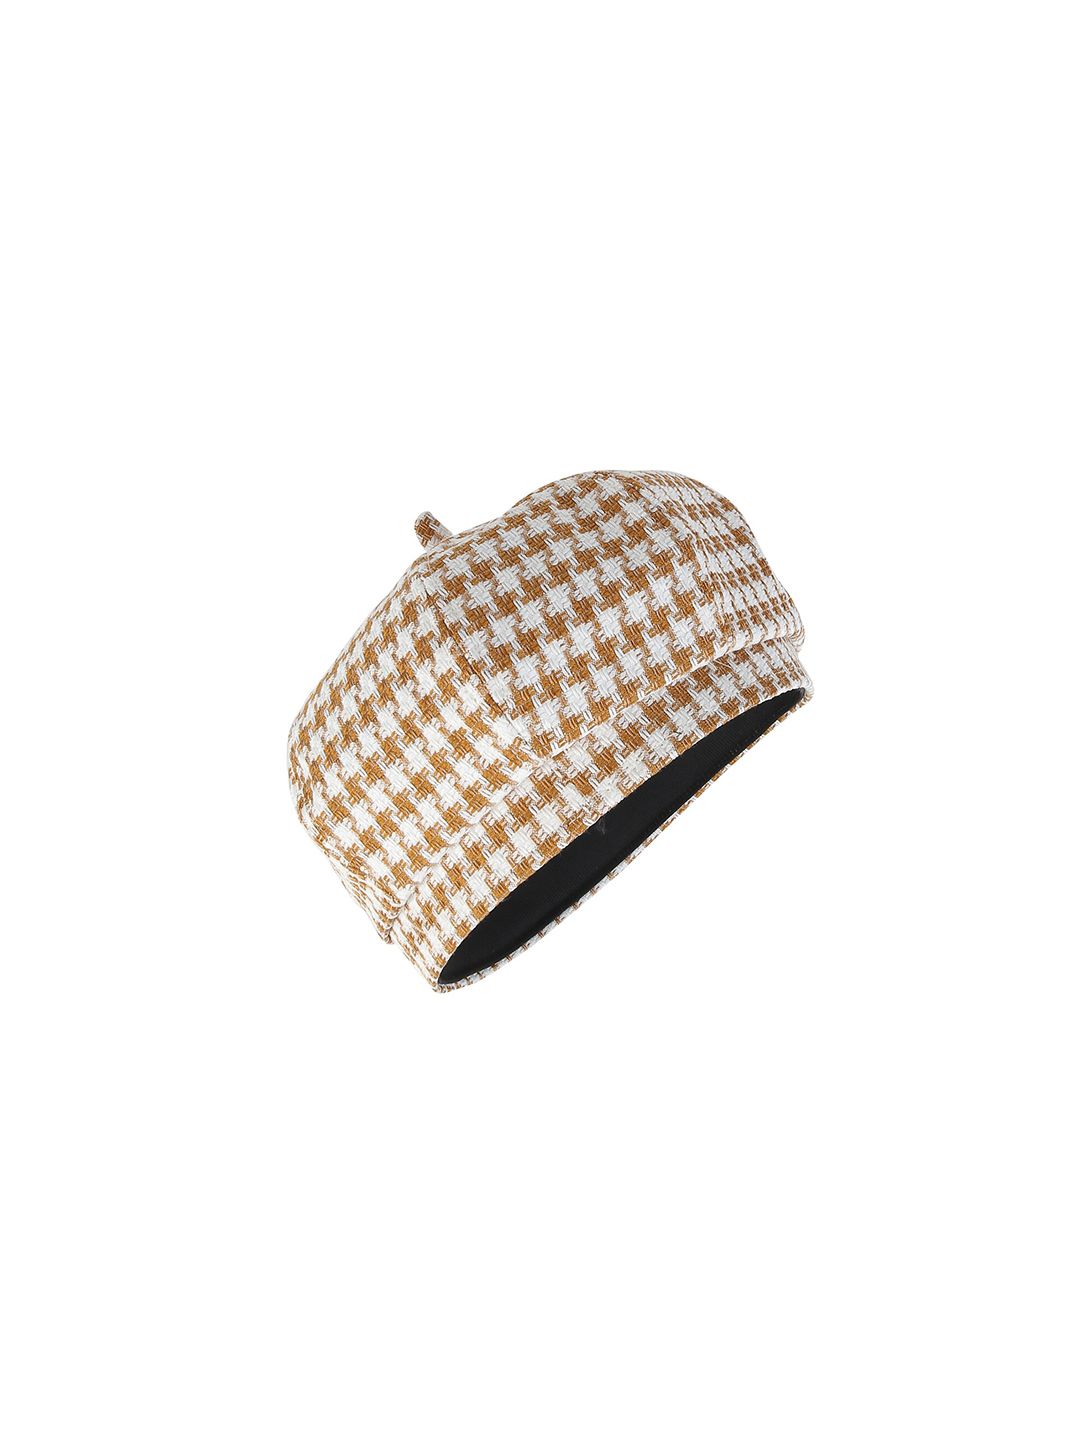 iSWEVEN Unisex Brown & White Printed Ascot Cap Price in India